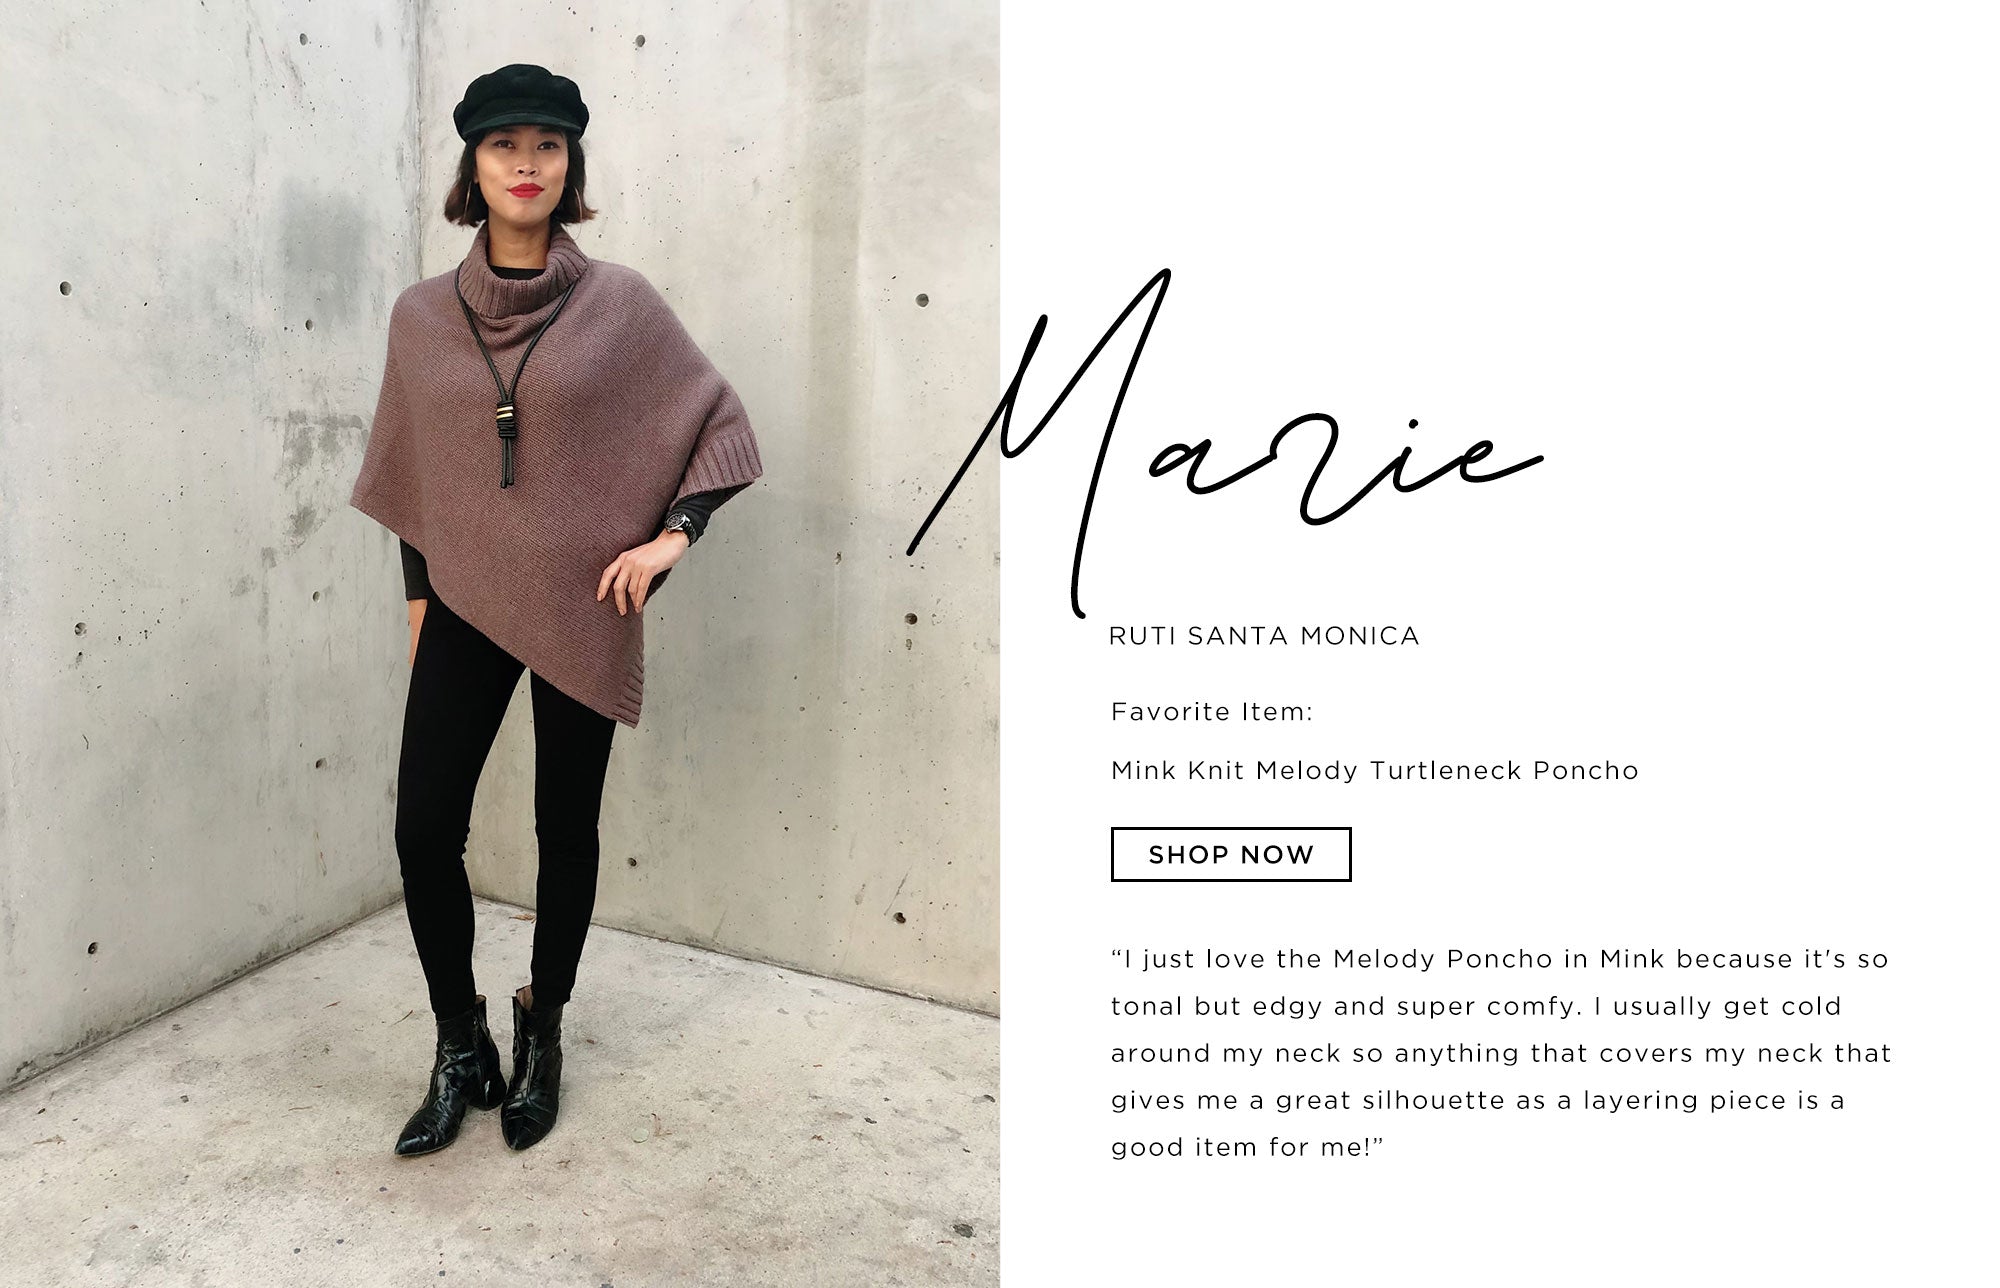 Marie Ruti Santa Monica   I just love the Melody Poncho in Mink because it's so tonal but edgy and super comfy. I usually get cold around my neck so anything that covers my neck that gives me a great silhouette as a layering piece is a good item for me!